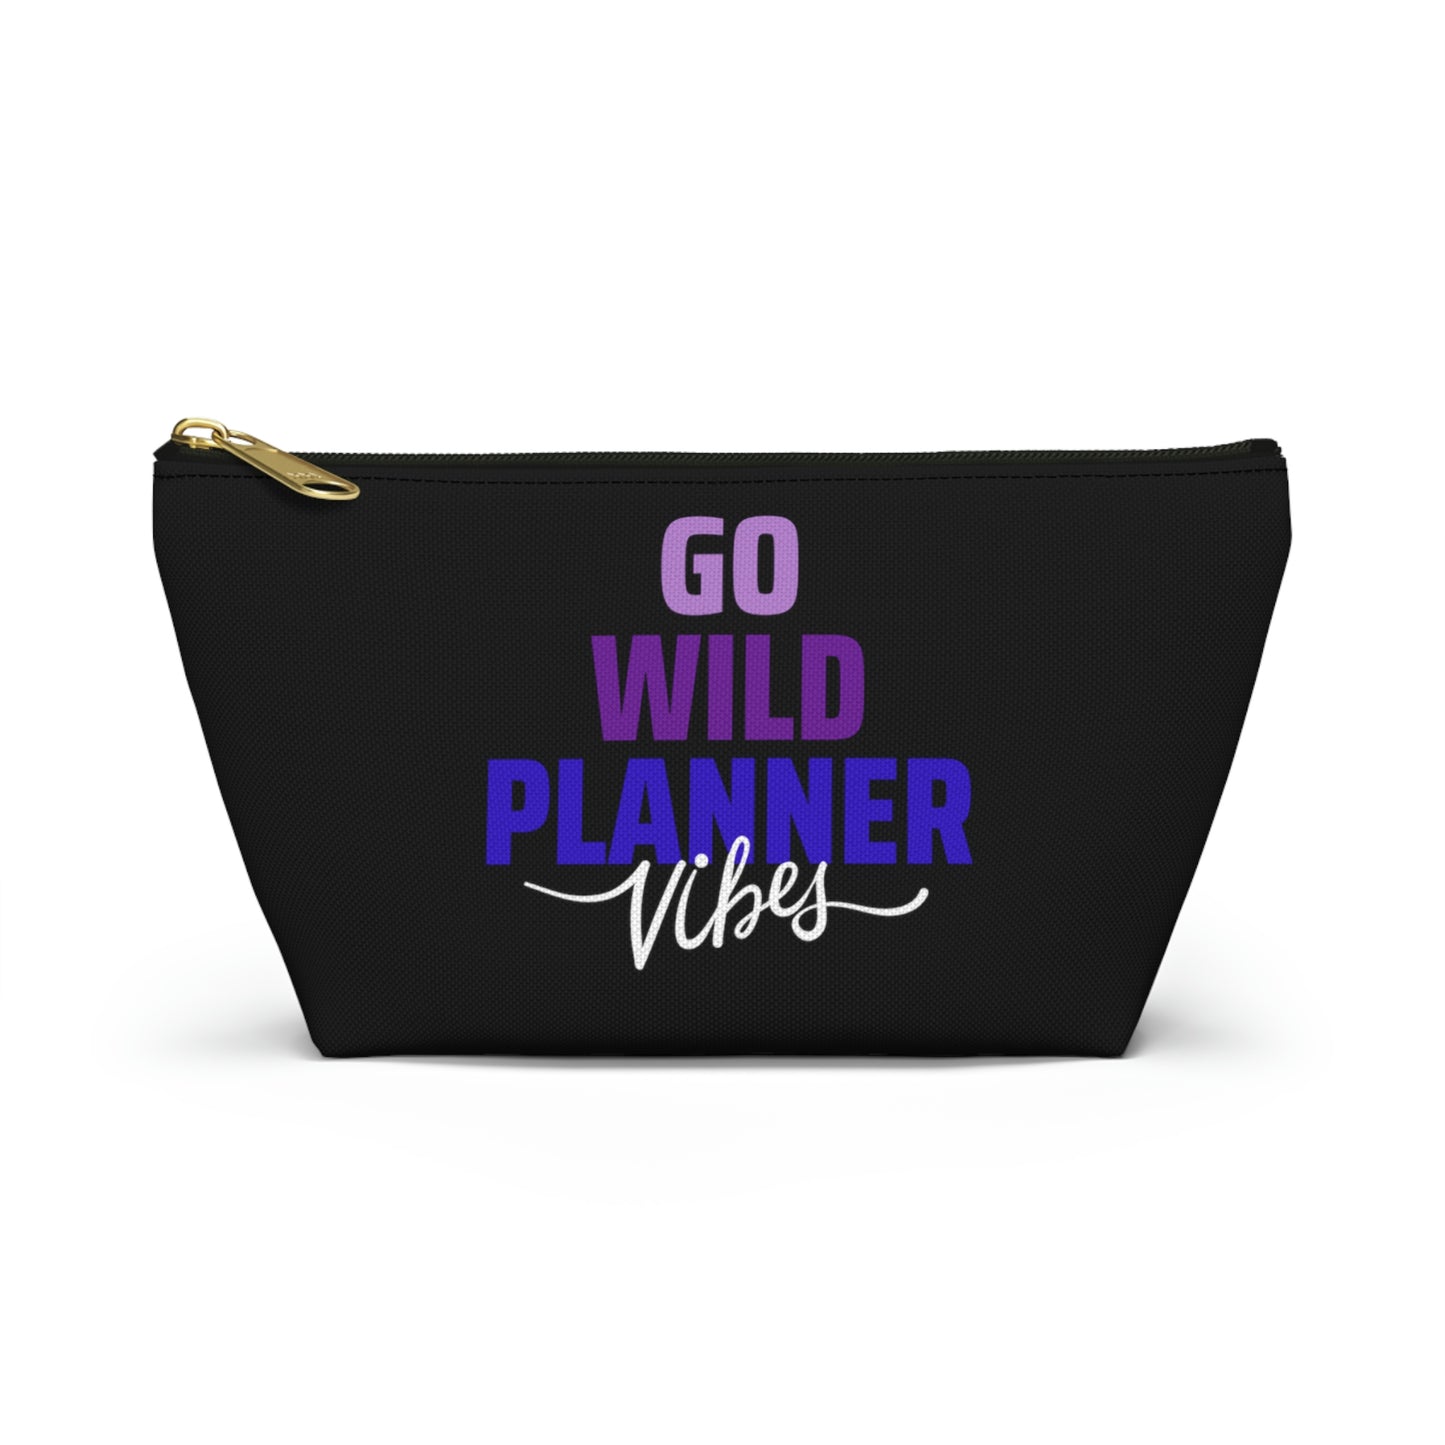 Go Wild Planner Vibes Accessory Pouch w T-bottom